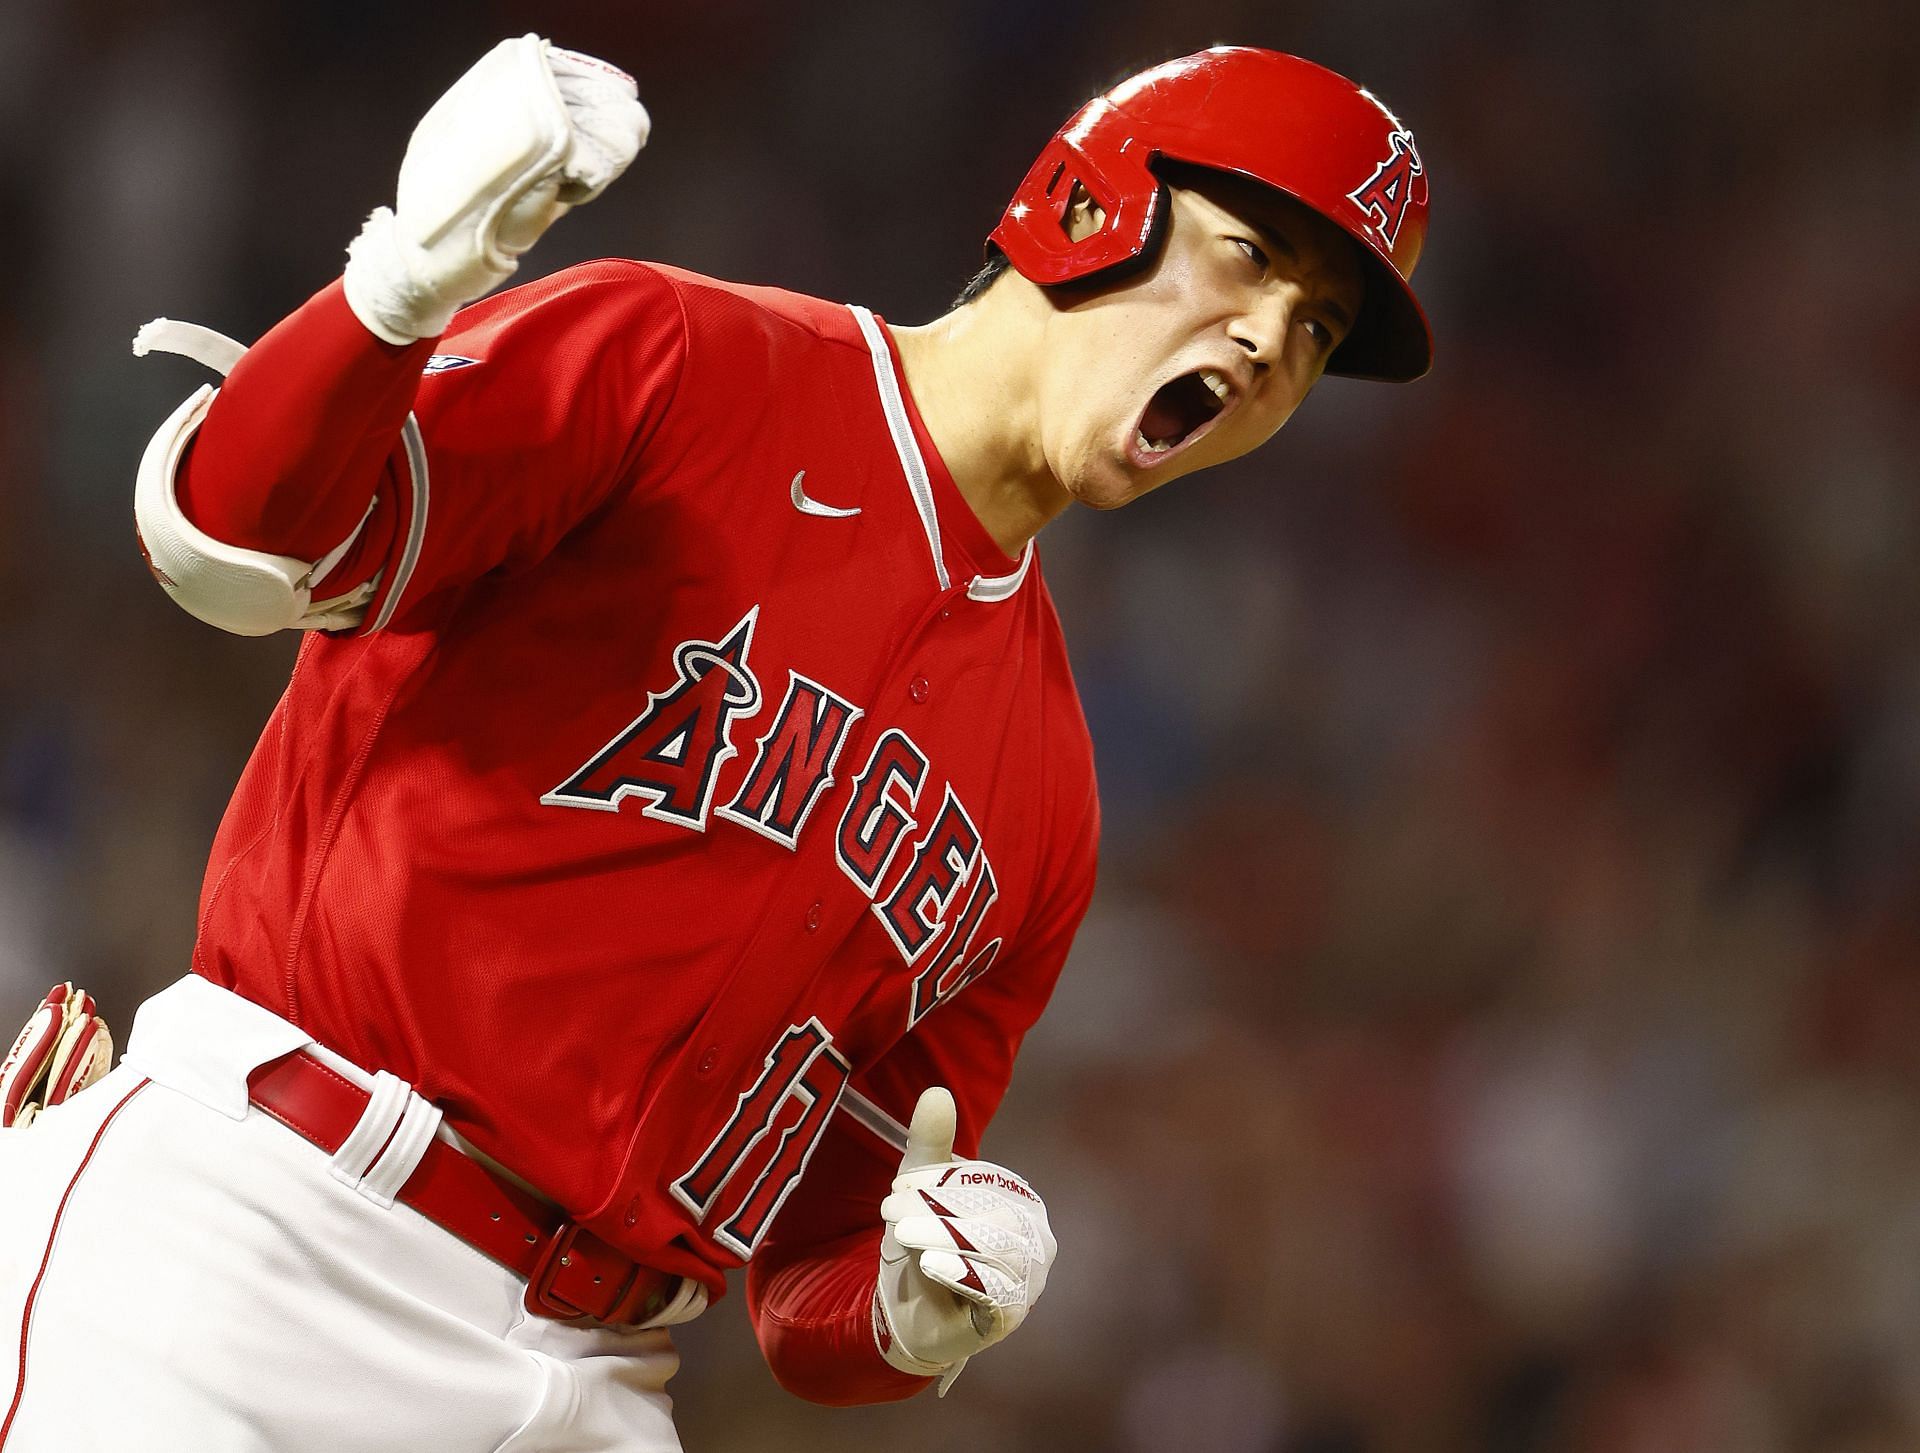 Shohei Ohtani of the Los Angeles Angels reacts after hitting a home run against the New York Yankees.